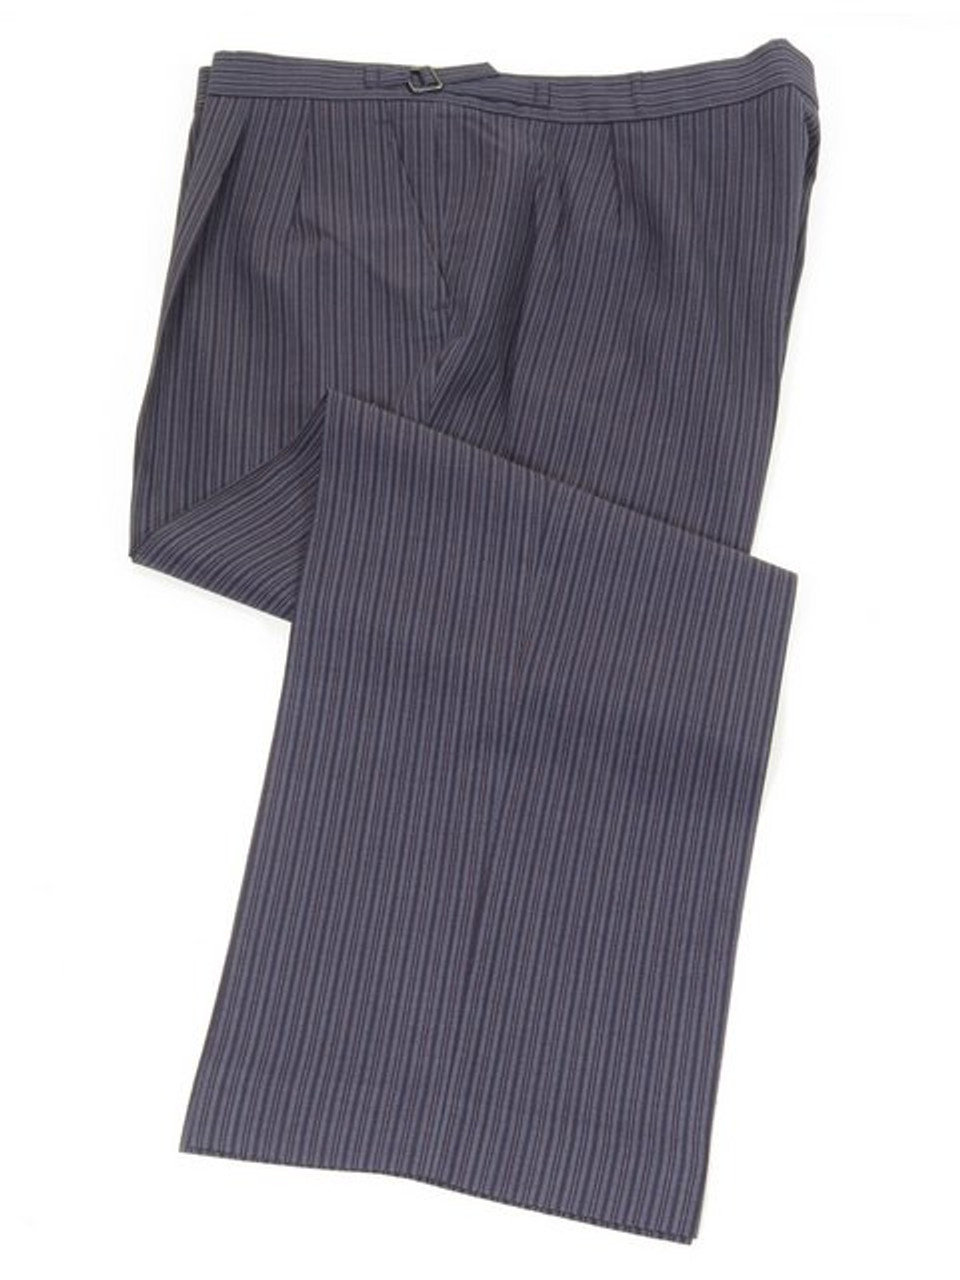 Morning Trousers | Ex-Hire Morning Suit Trousers | Tweedmans